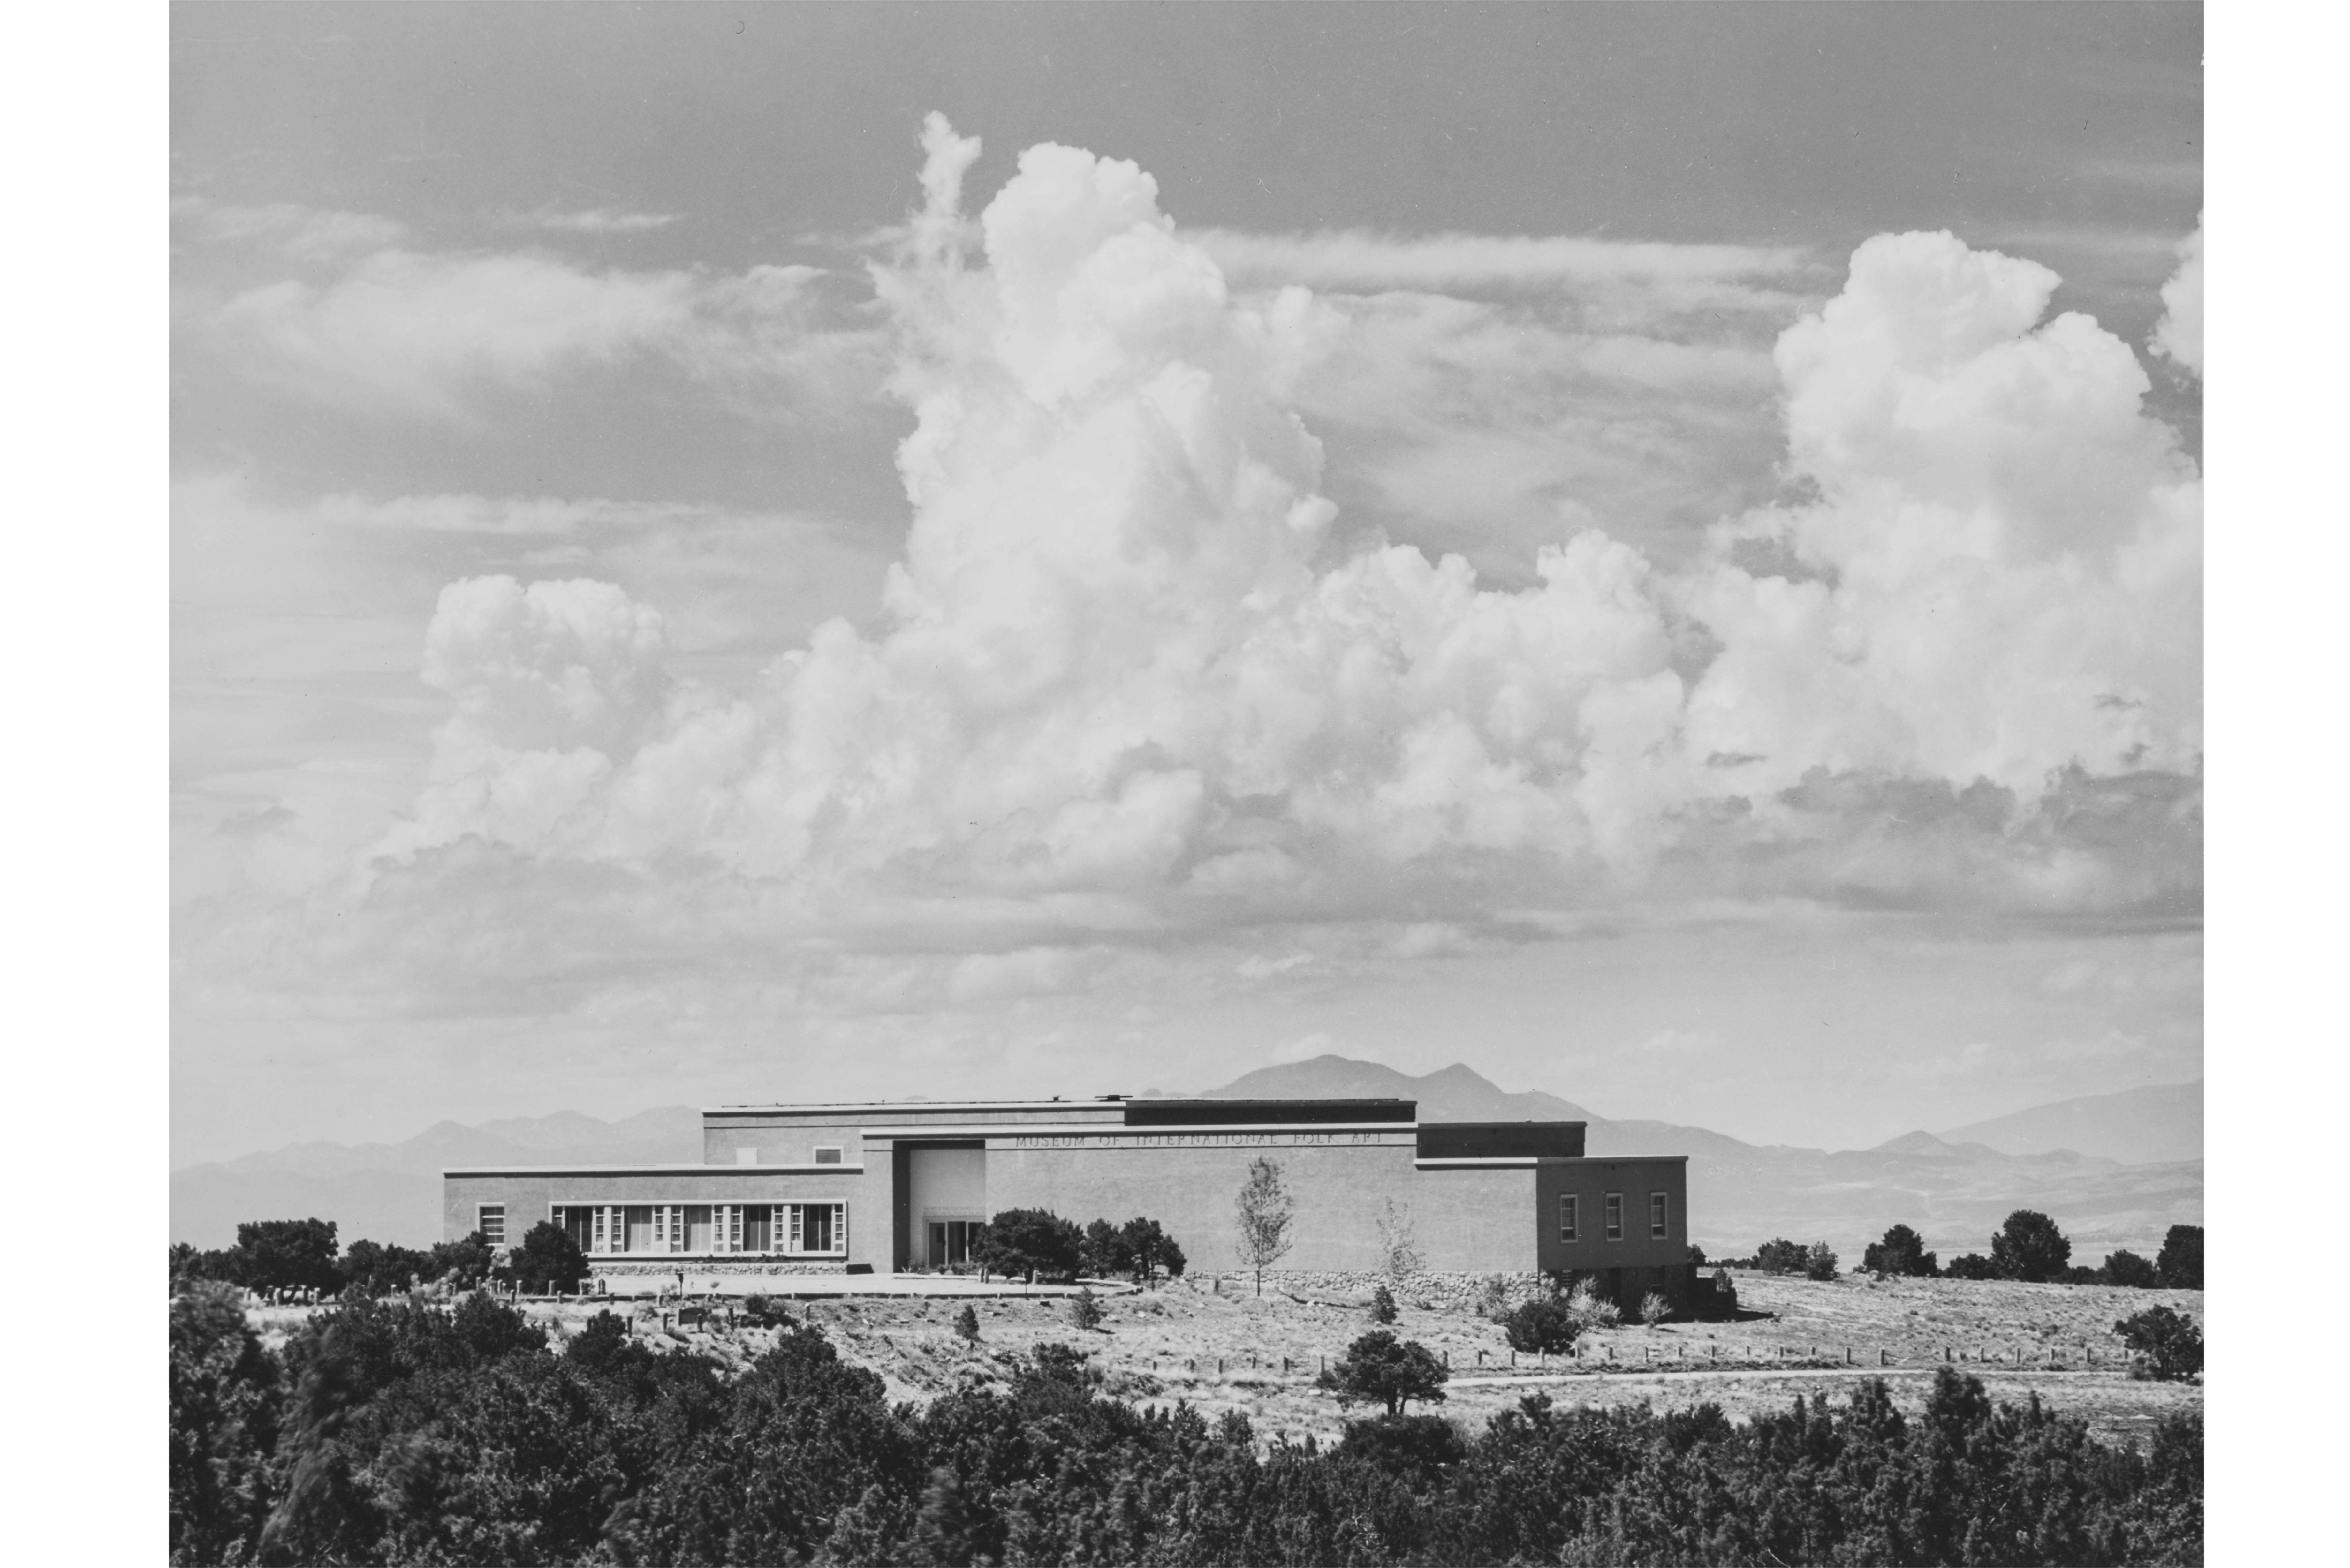 image of the Museum exterior, showing it settled into the landscape under a dramatic cloudbank